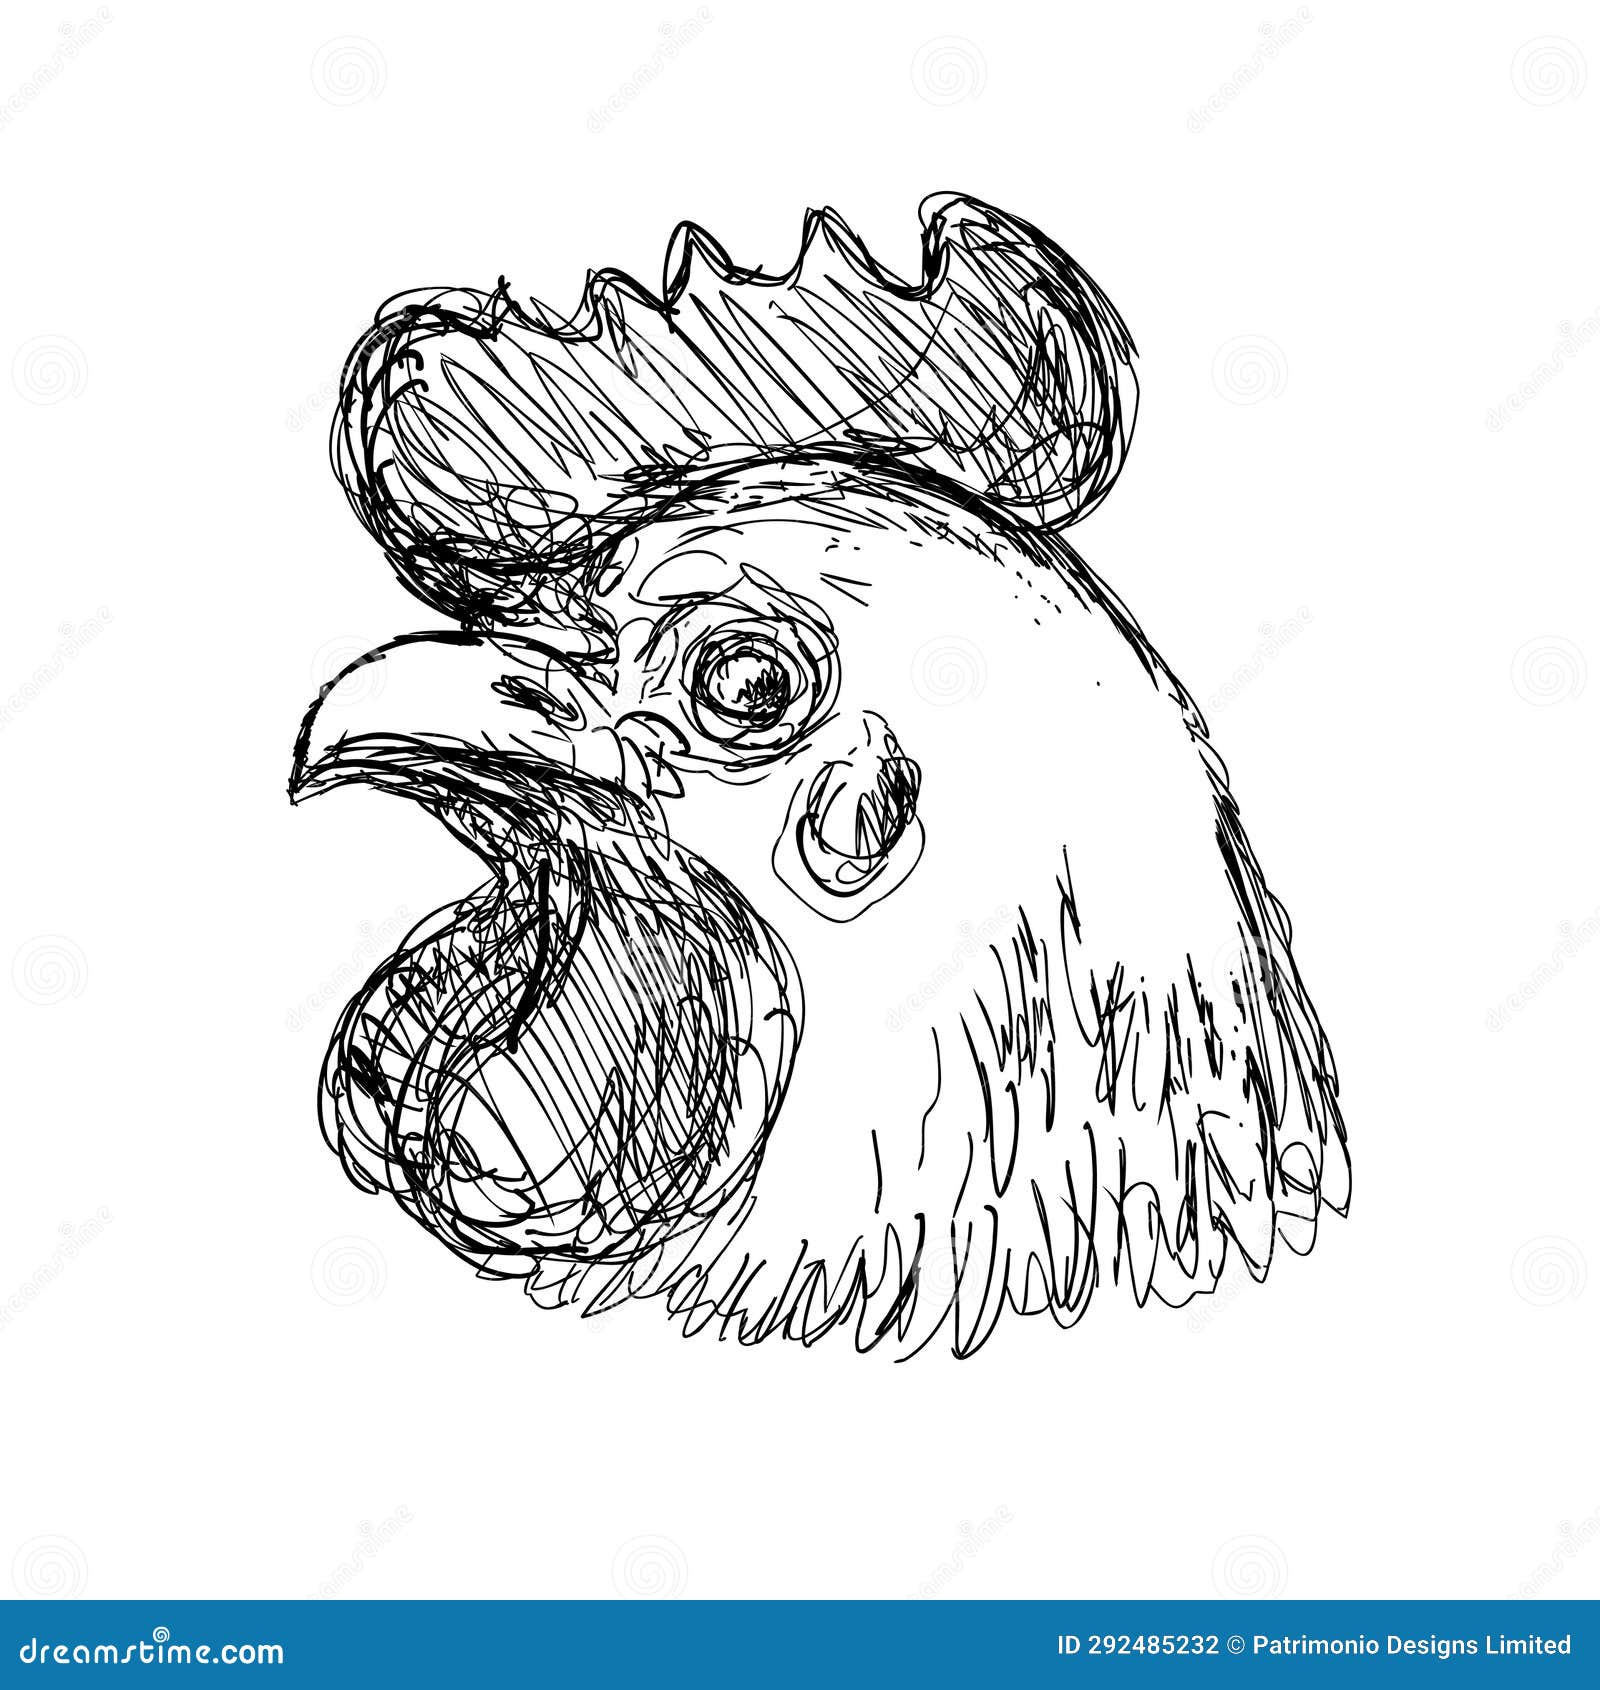 Grouchy Rooster Cartoon Drawing – Black and White Inked and Color